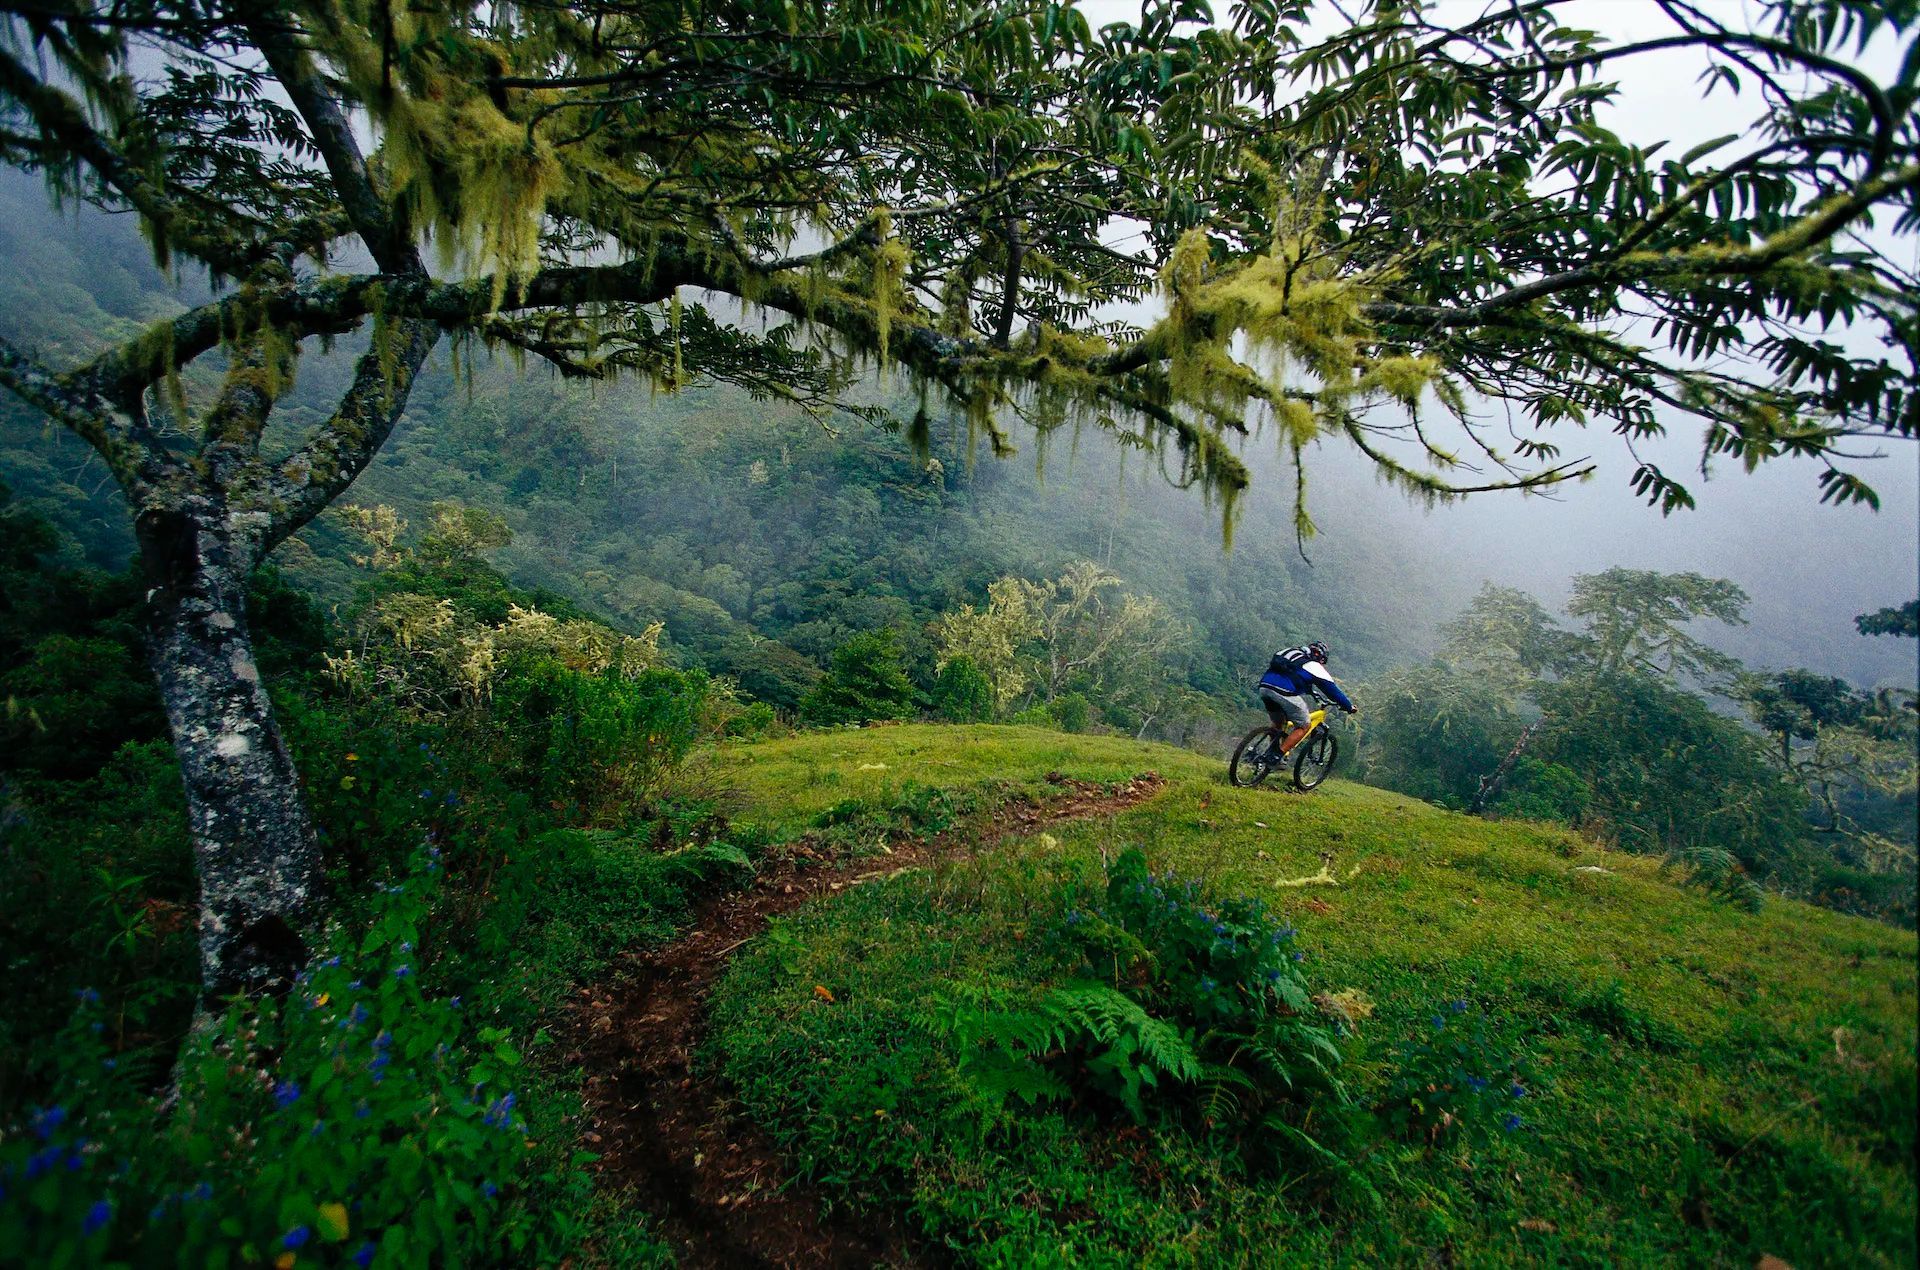 What To Do in Costa Rica: 8 of the Best Adventures